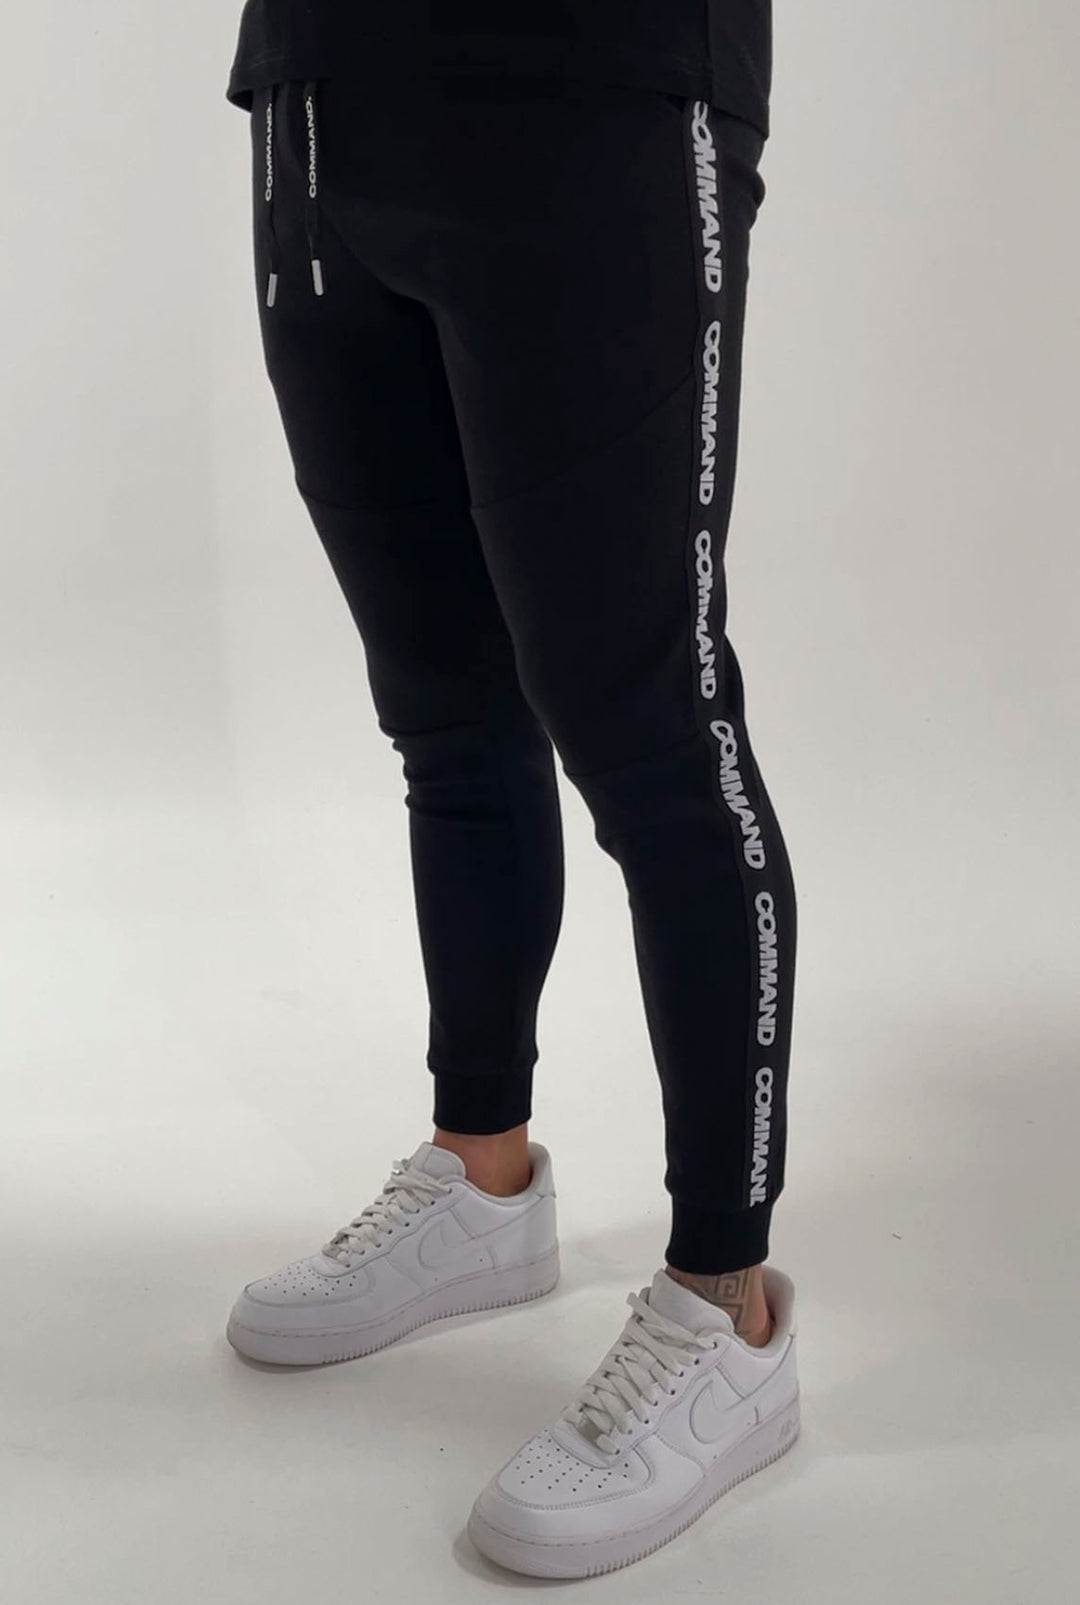 Trackpants – Command Melbourne